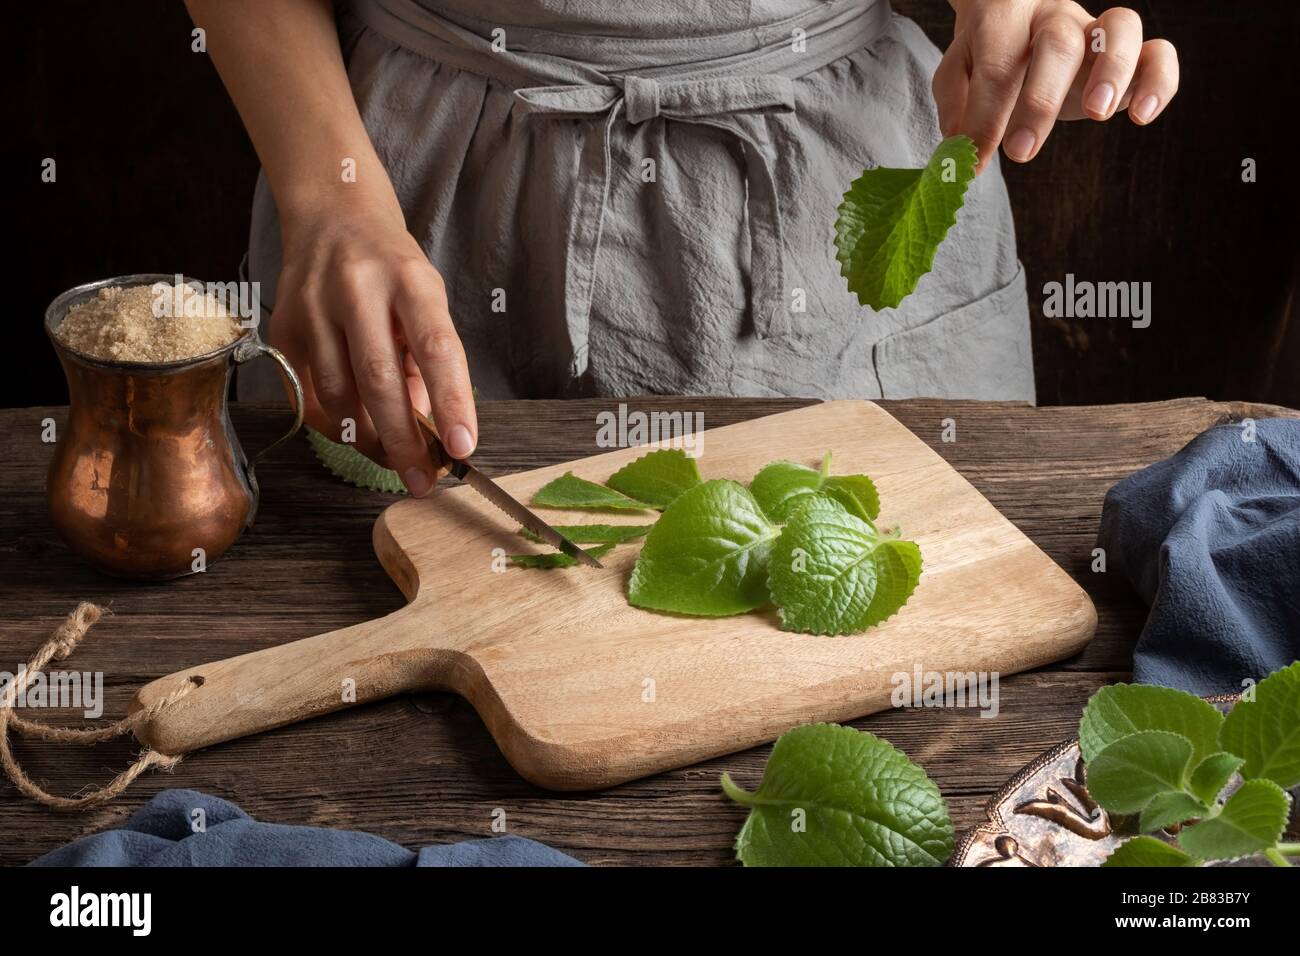 Cutting up silver spurflower leaves to prepare homemade herbal syrup against common cold Stock Photo